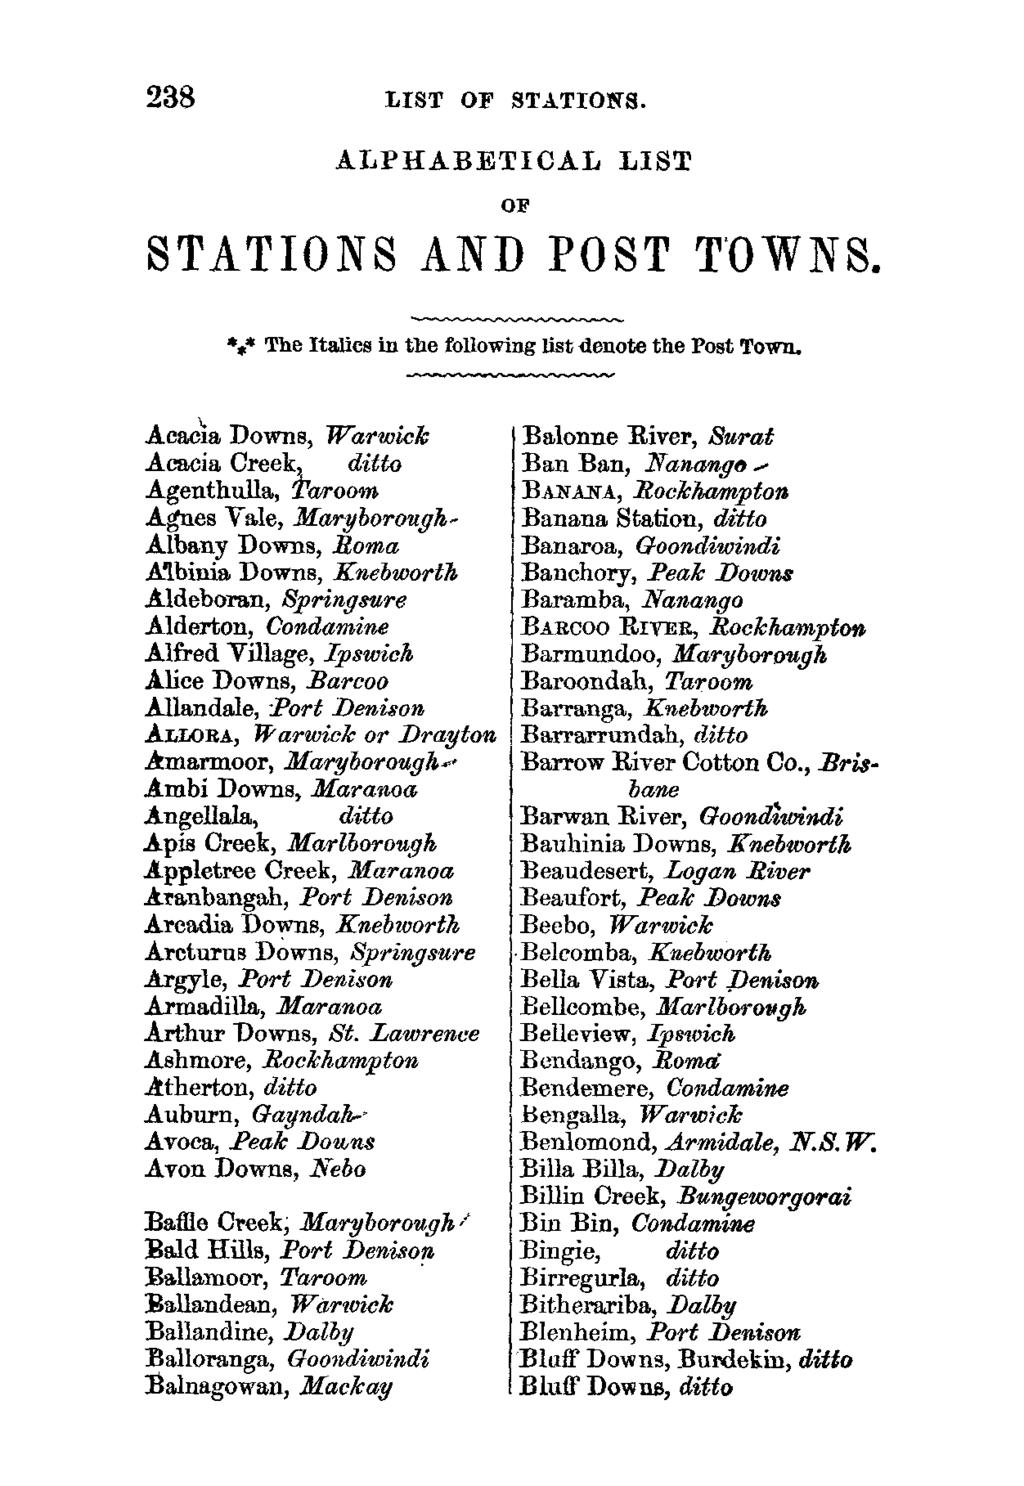 238 LIST OF STATIONS. ALPHABETICAL LIST OF STATIONS AND POST TOWNS. *** The Italics in the following list denote the Post Town.